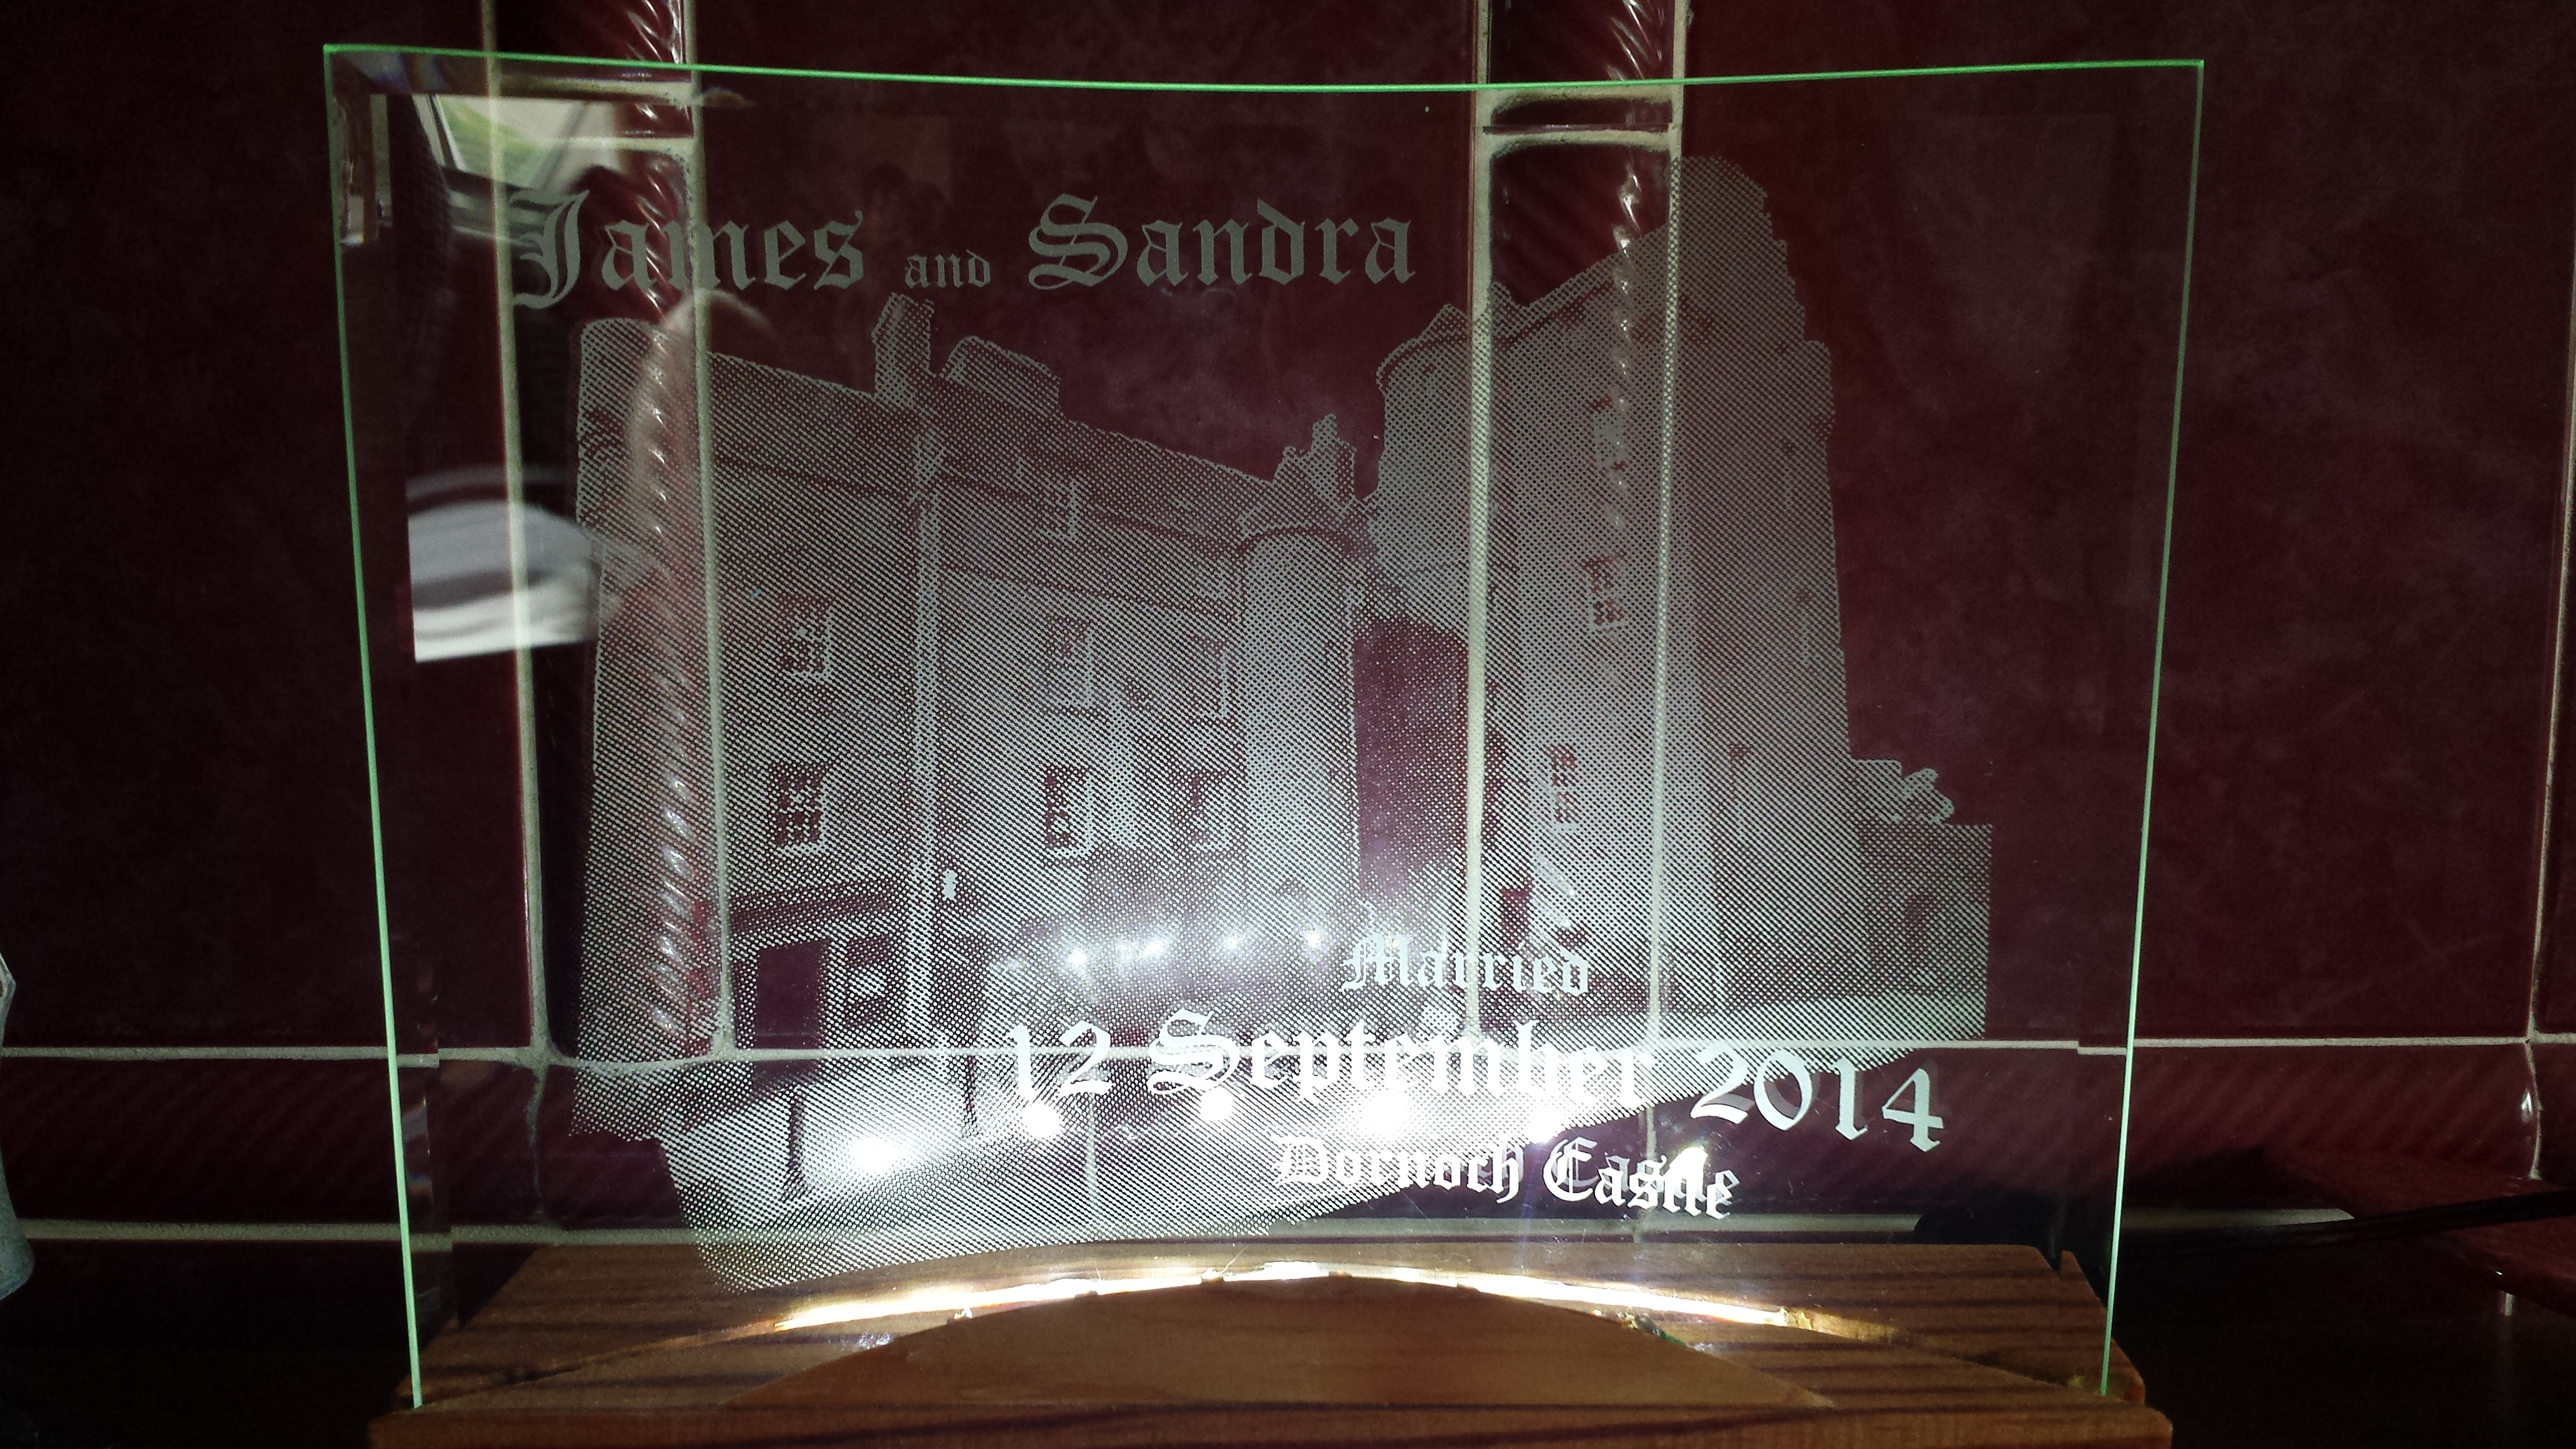 This is a picture engraving of the Dornoch Castle hotel directly onto the back of a piece of curved glass.On the front of the glass is engraved James and Sandra and the date and location of the marriage. Engraved in this manner creates depth of field and gives a 3D effect.